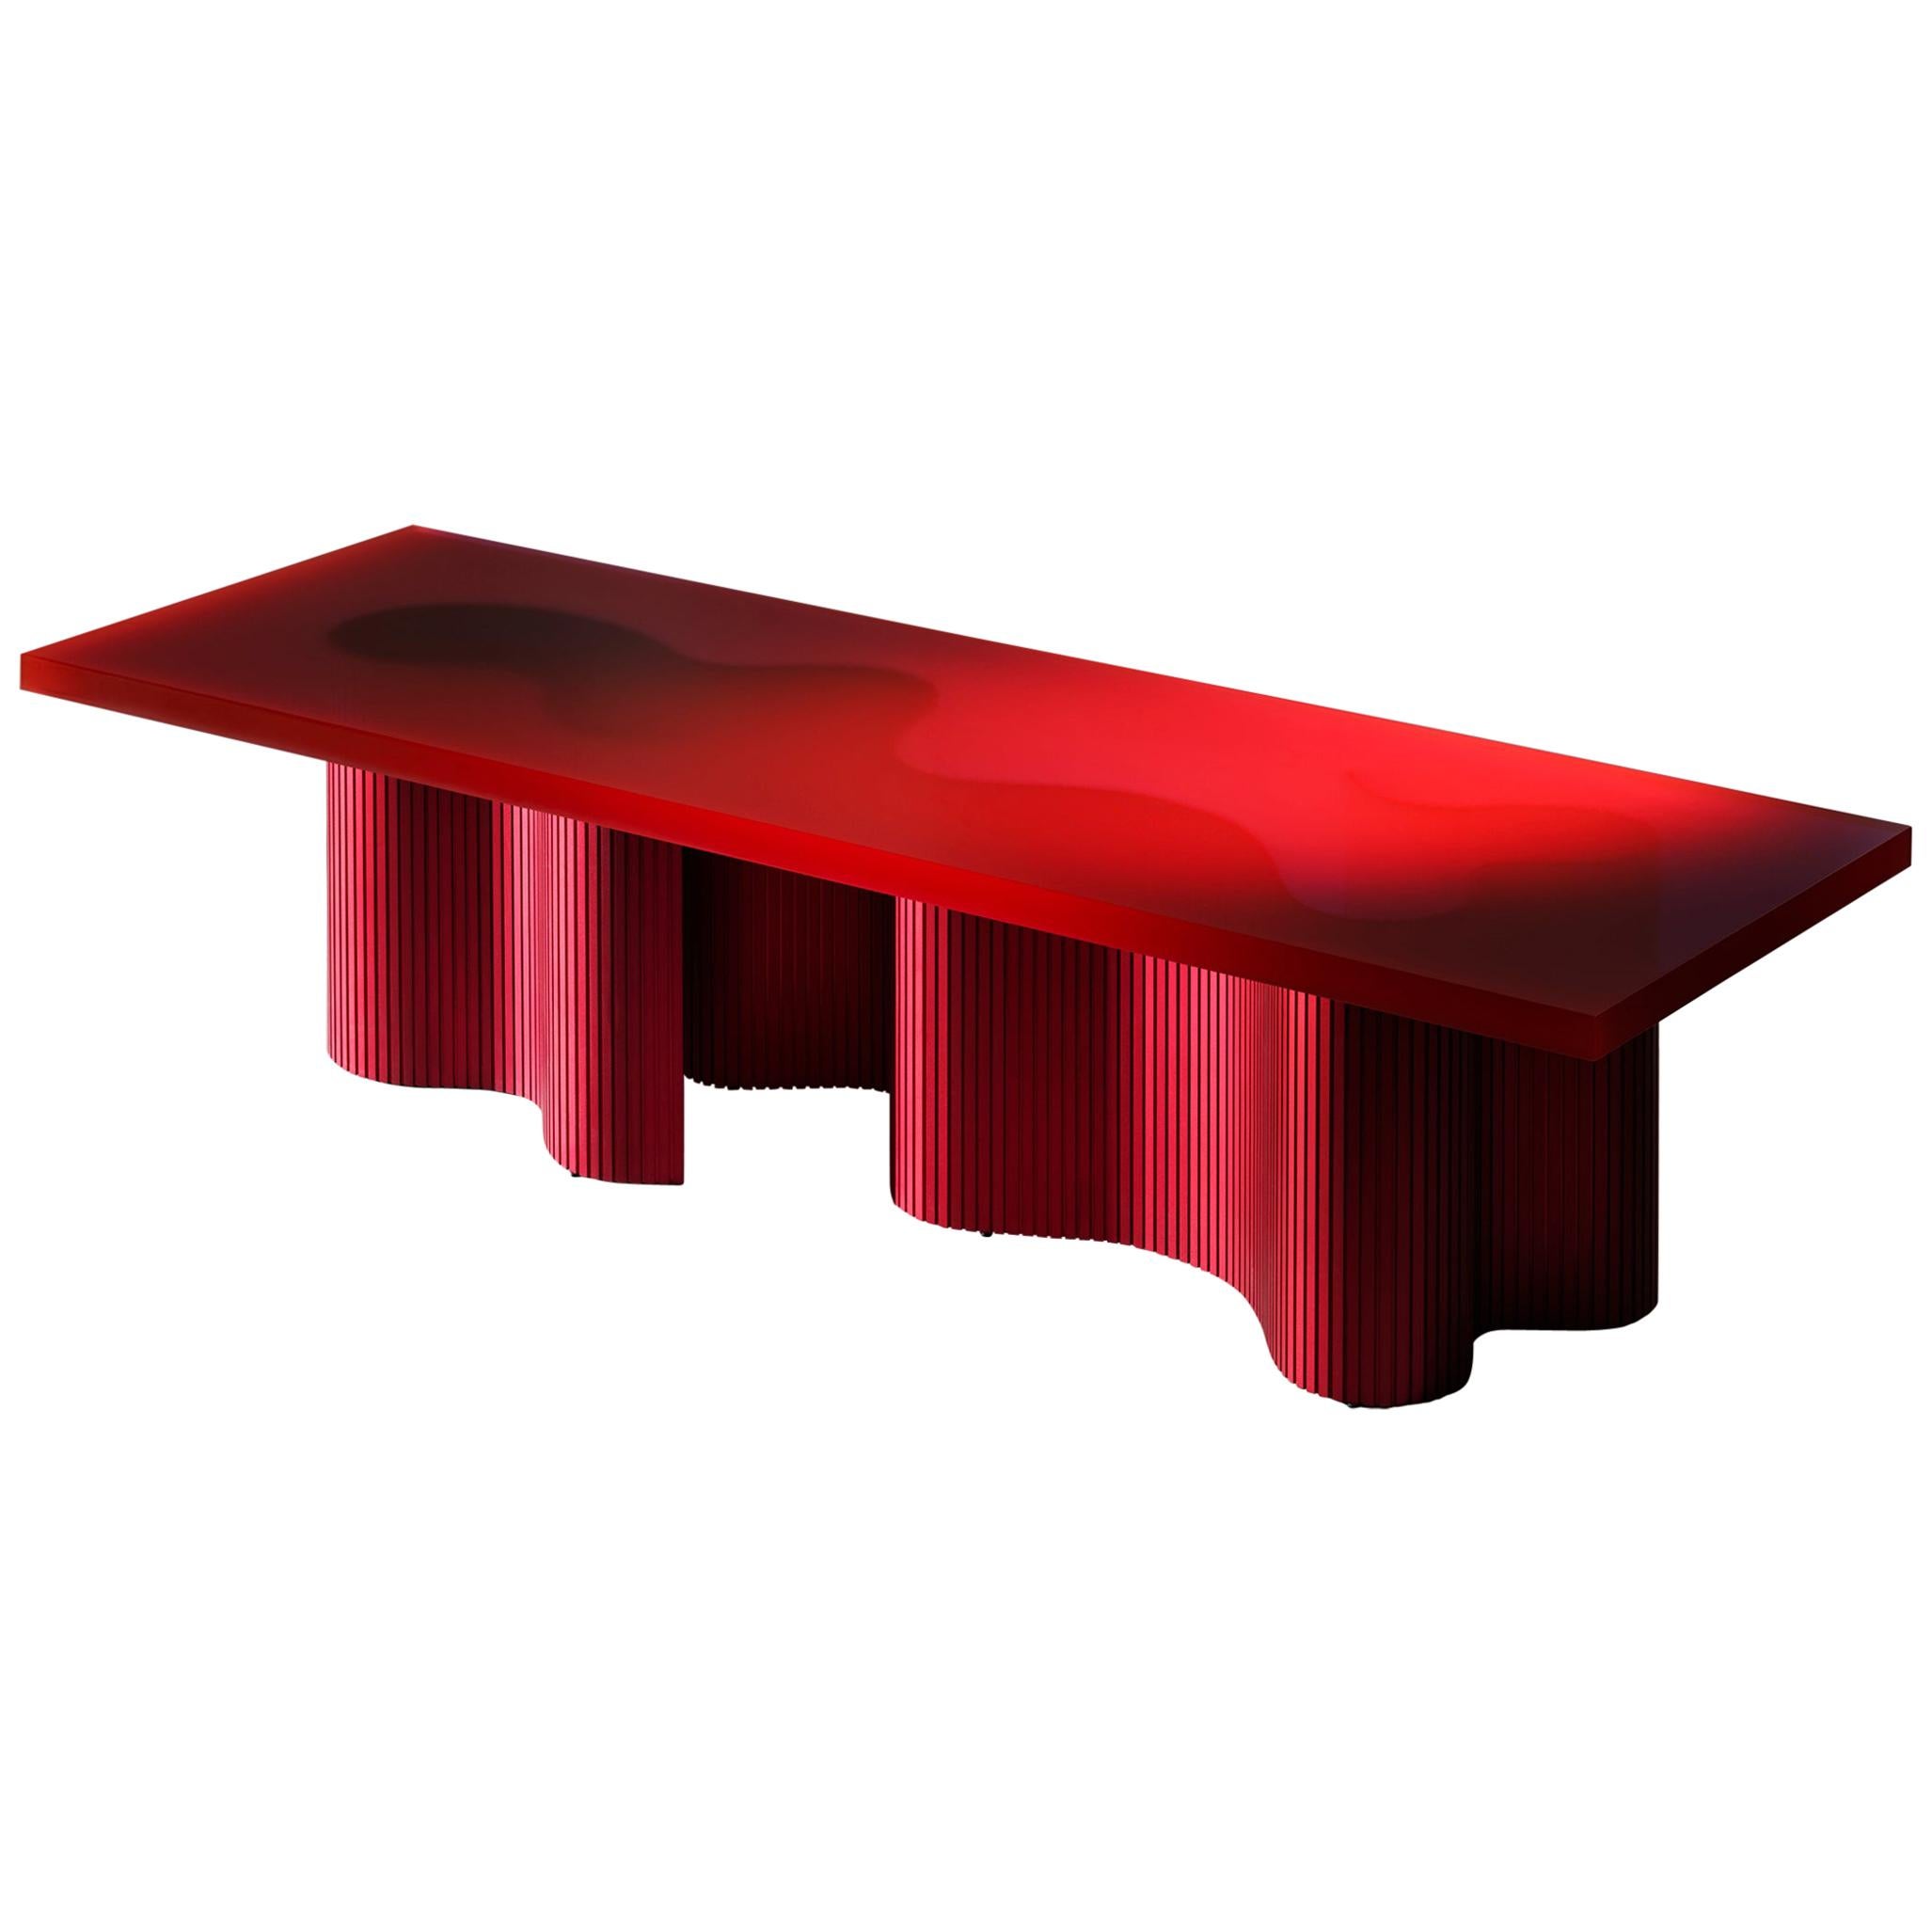 Contemporary Resin Coffee Table, Red Polished Spine Table, by Erik Olovsson